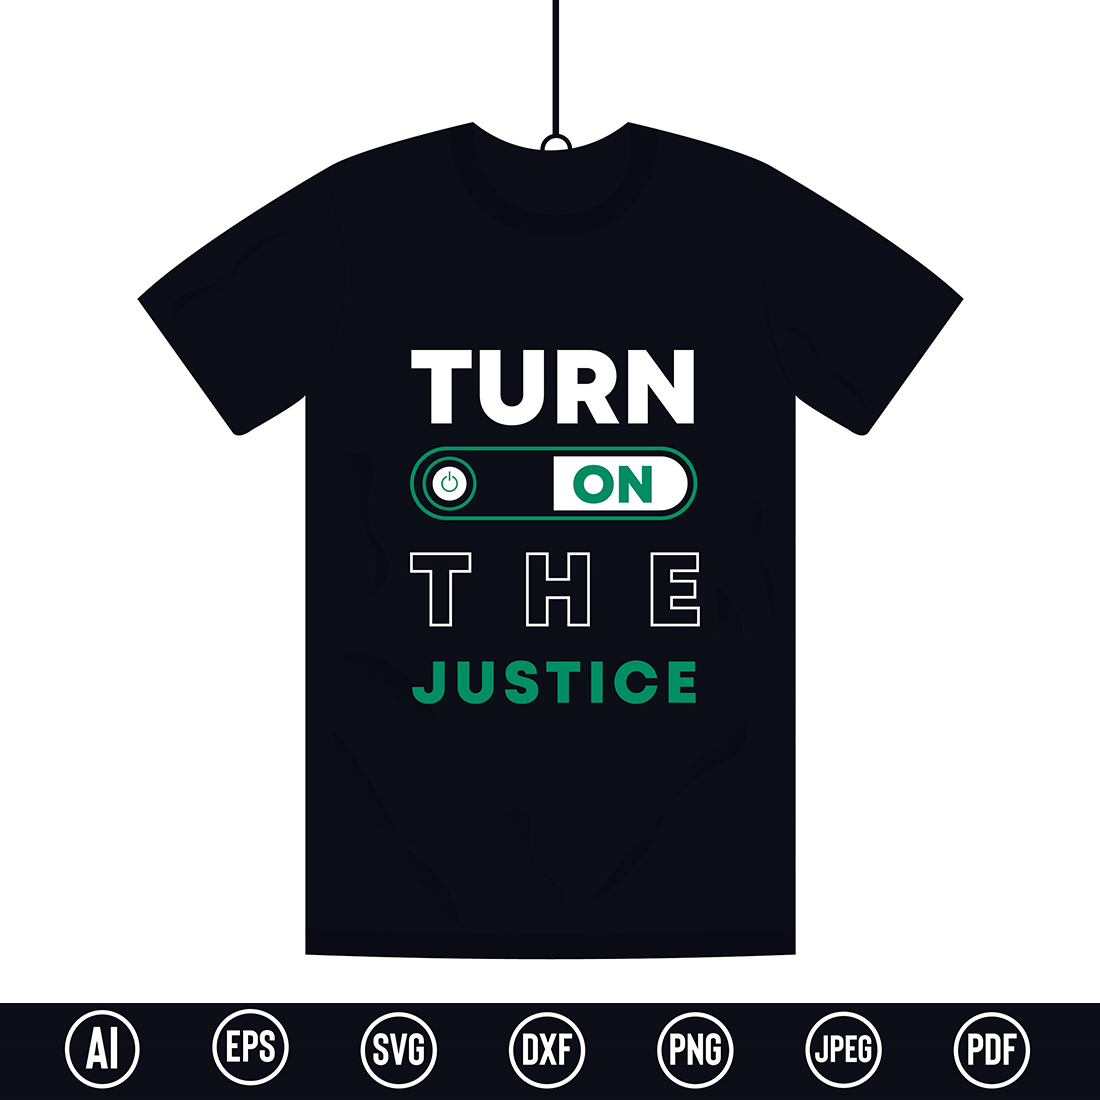 Modern Typography T-Shirt design with “Turn on the justice” quote for t-shirt, posters, stickers, mug prints, banners, gift cards, labels etc cover image.